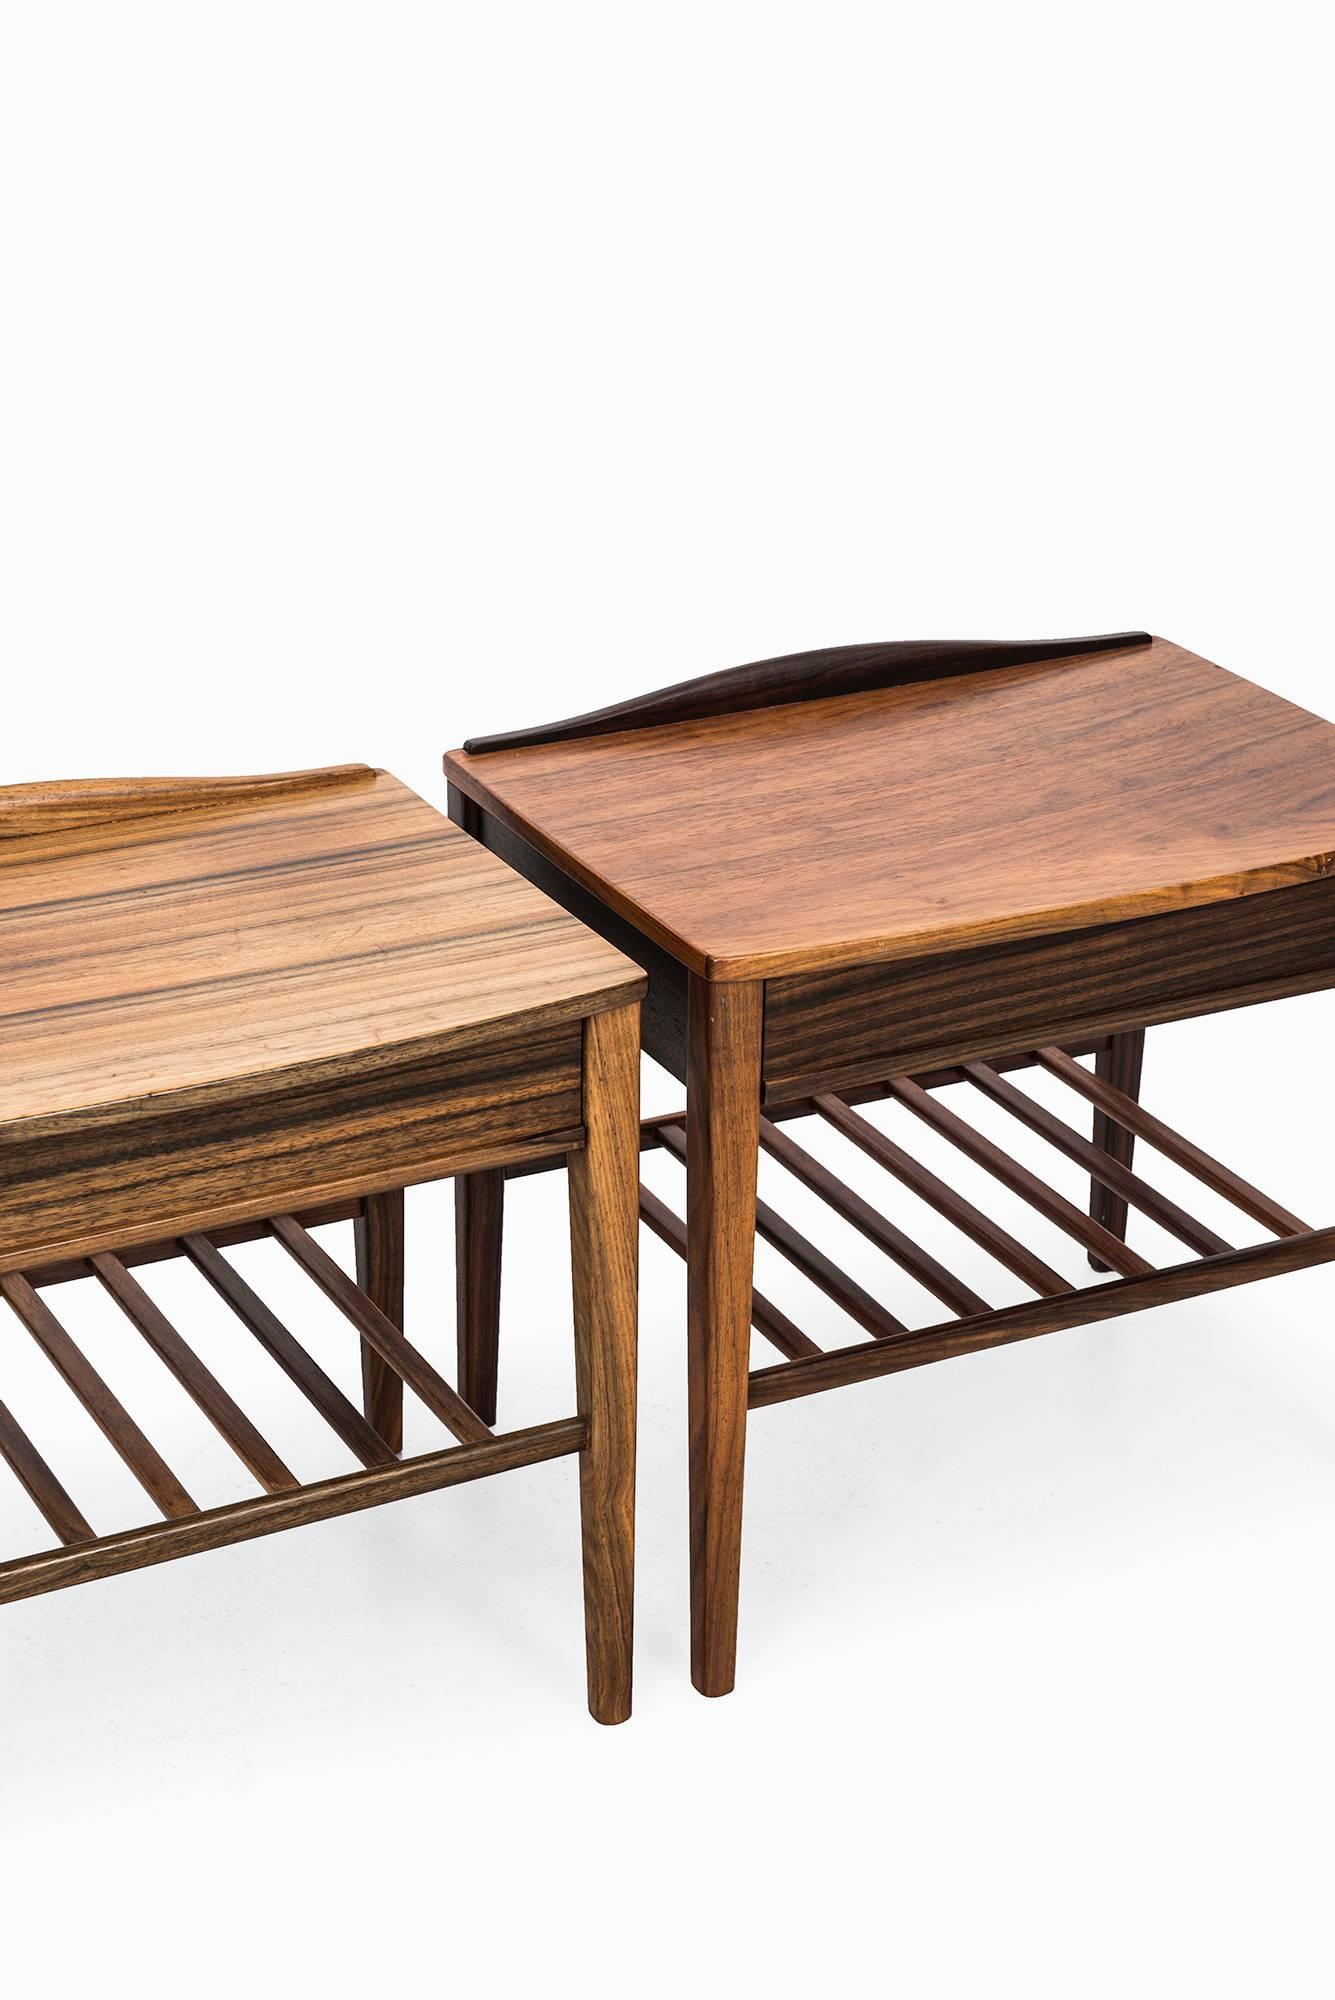 Mid-20th Century Pair of Bedside Tables, High Quality, in Brazilian Rosewood